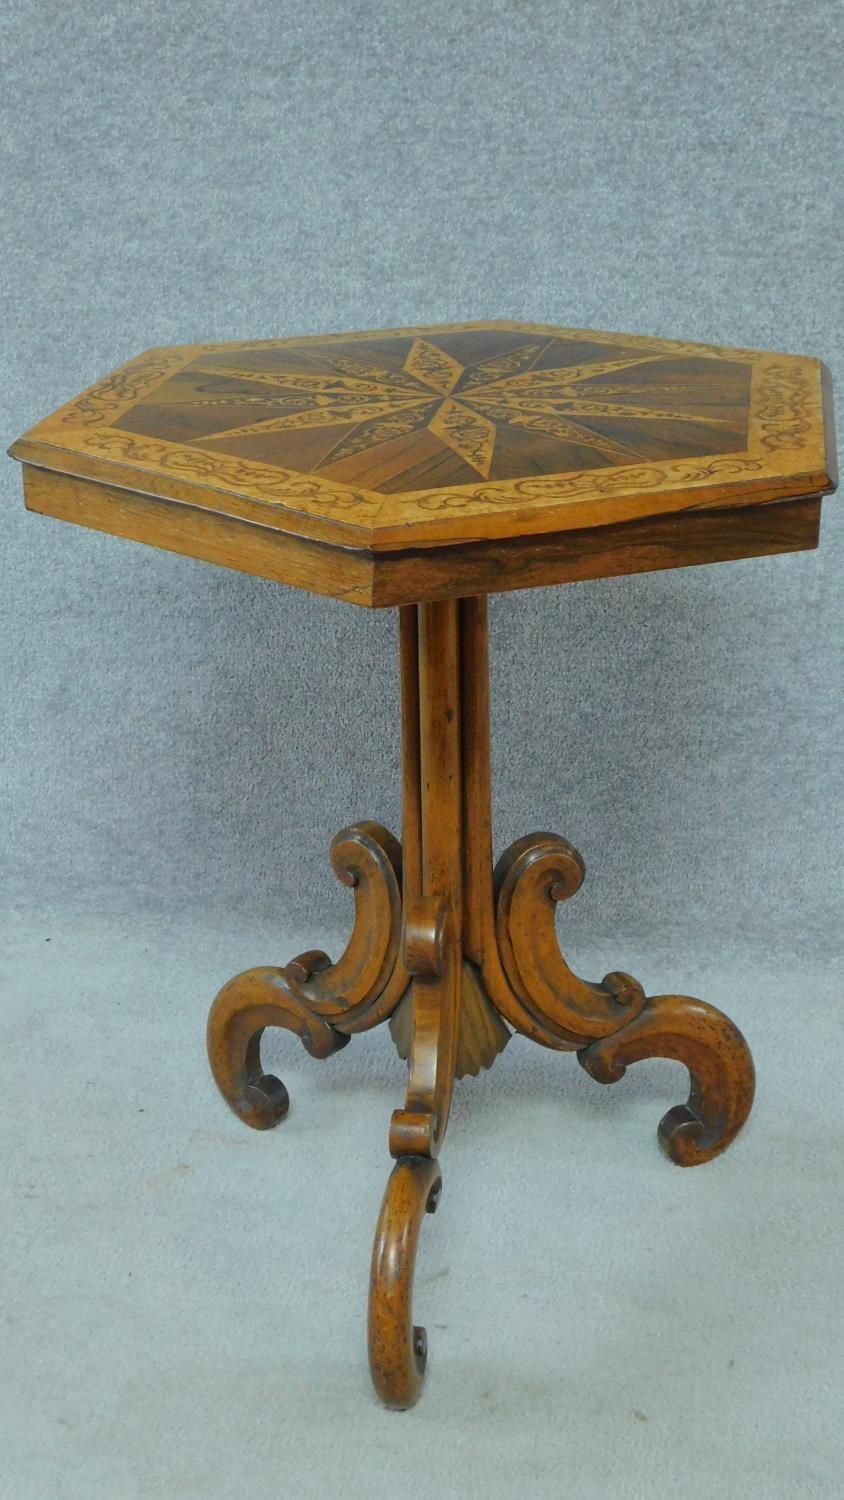 A mid Victorian bird's eye maple and rosewood centre table with profuse Arabesque inlay with tilt